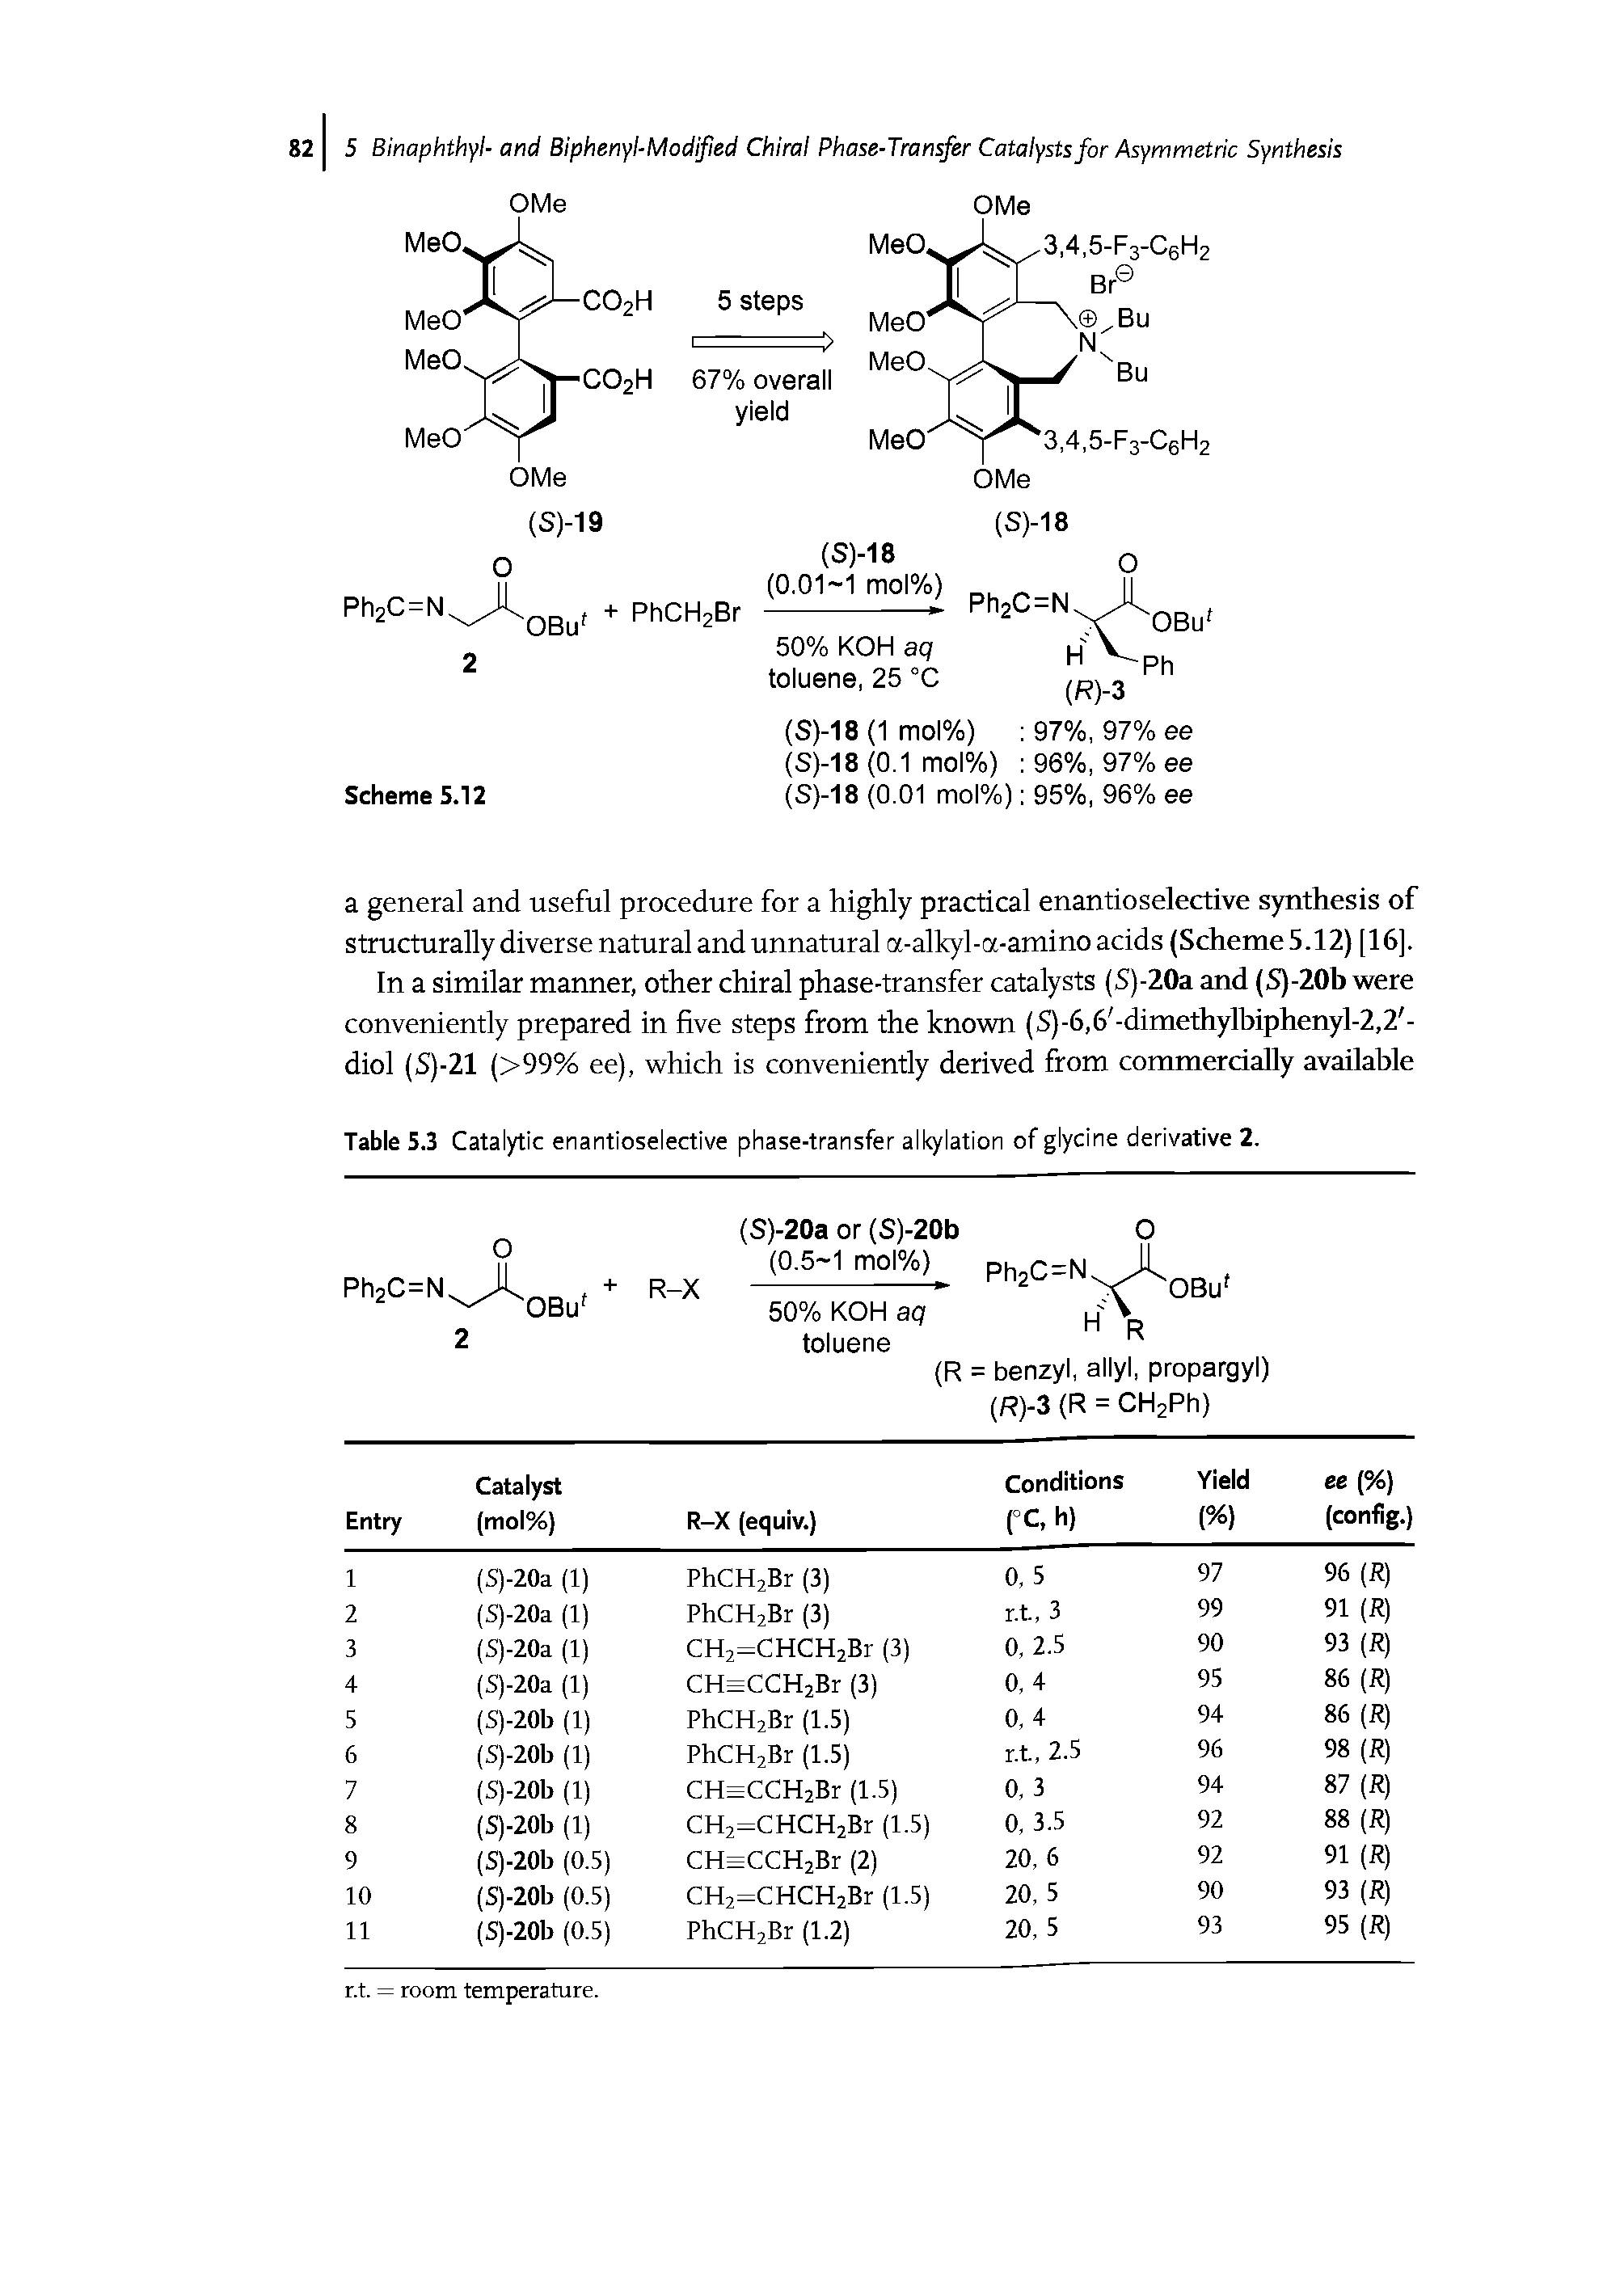 Table 5.3 Catalytic enantioselective phase-transfer alkylation of glycine derivative 2.